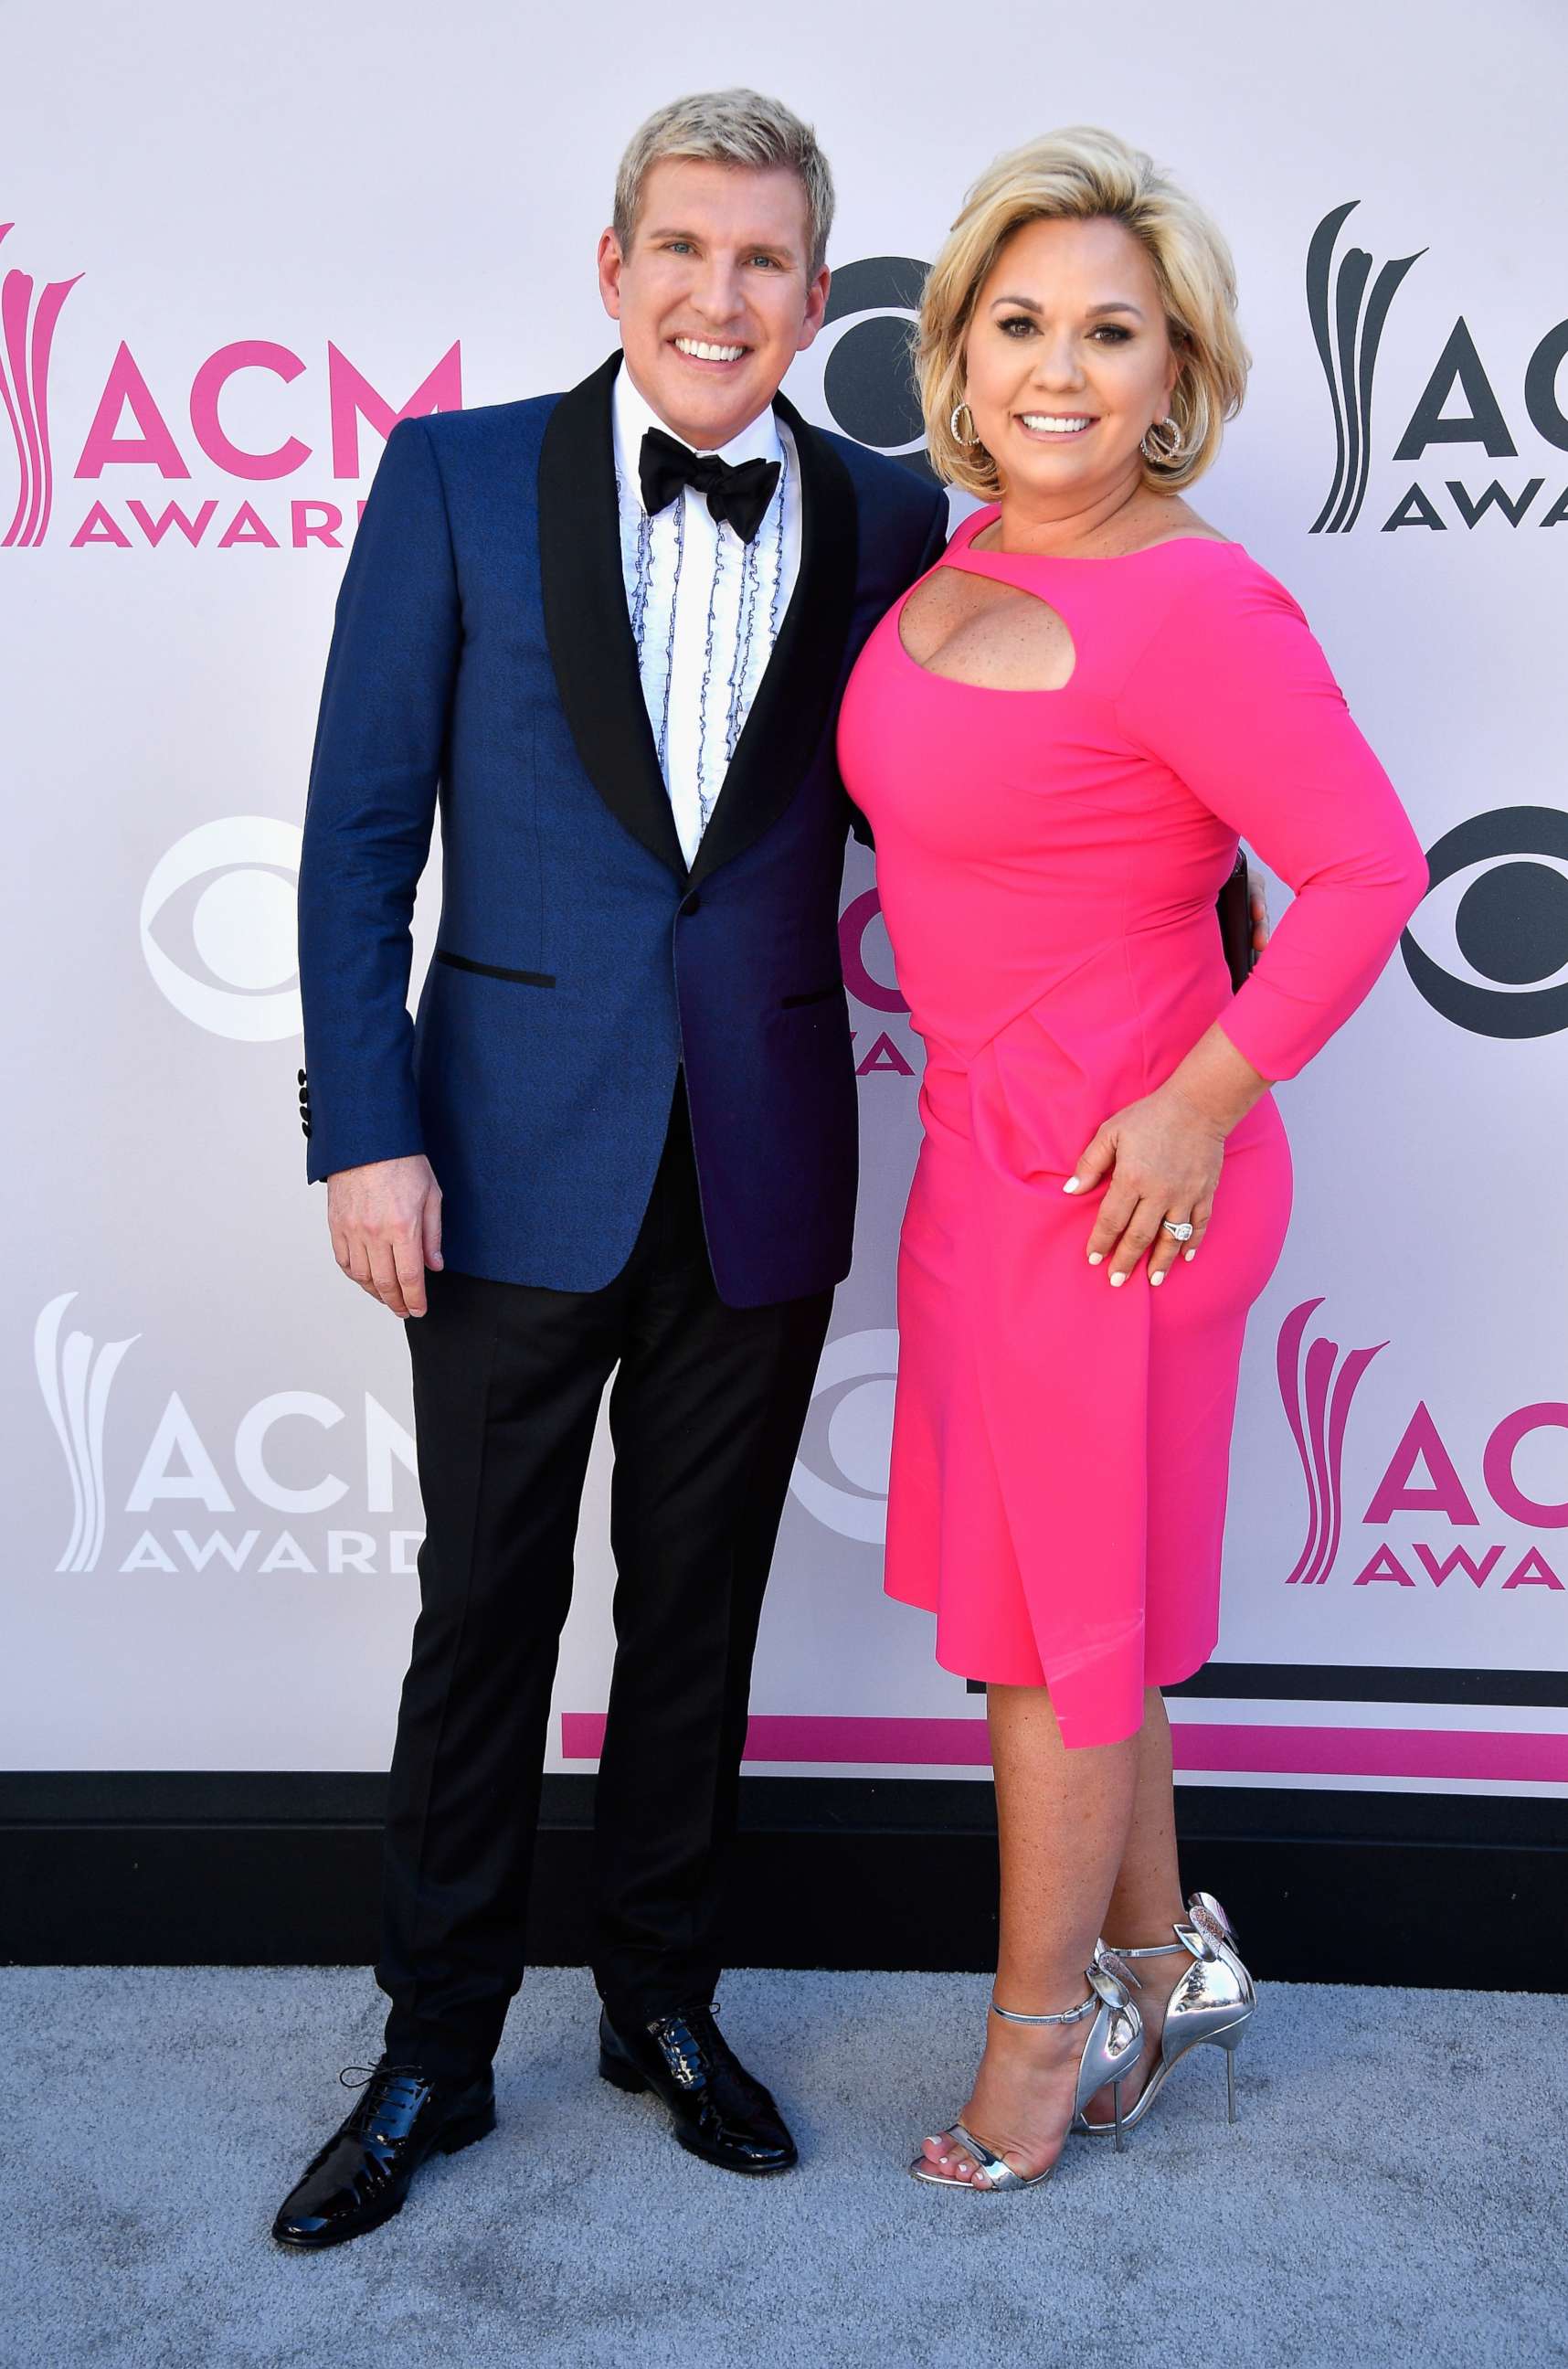 PHOTO: TV personalities Todd Chrisley and Julie Chrisley attend the 52nd Academy Of Country Music Awards at Toshiba Plaza on April 2, 2017 in Las Vegas, Nevada.